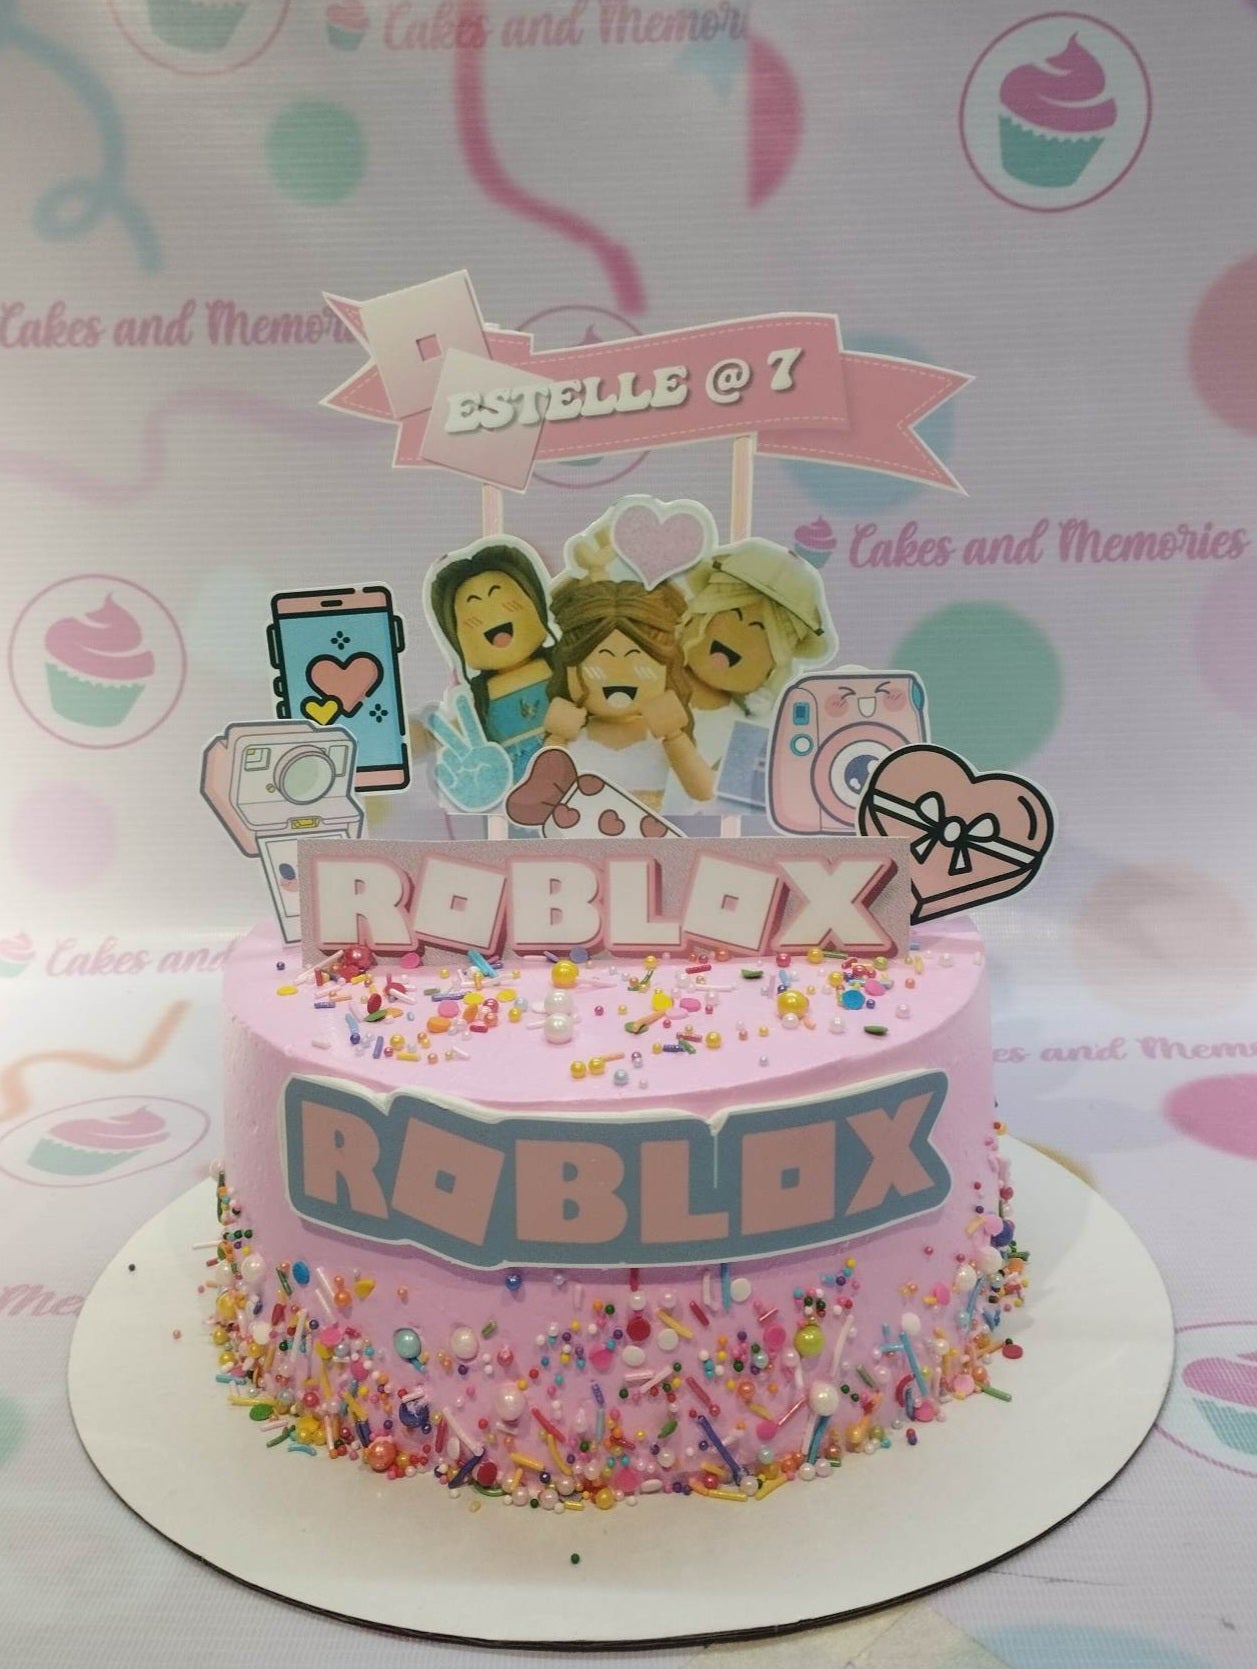 This custom decorated cake is perfect for any party or special occasion. It features Roblox game blocks and figures in vibrant pink, purple and blue colors, with a generous helping of sprinkles. It's perfect for a kid's or boy's birthday and is sure to impress with its quality and attention to detail.